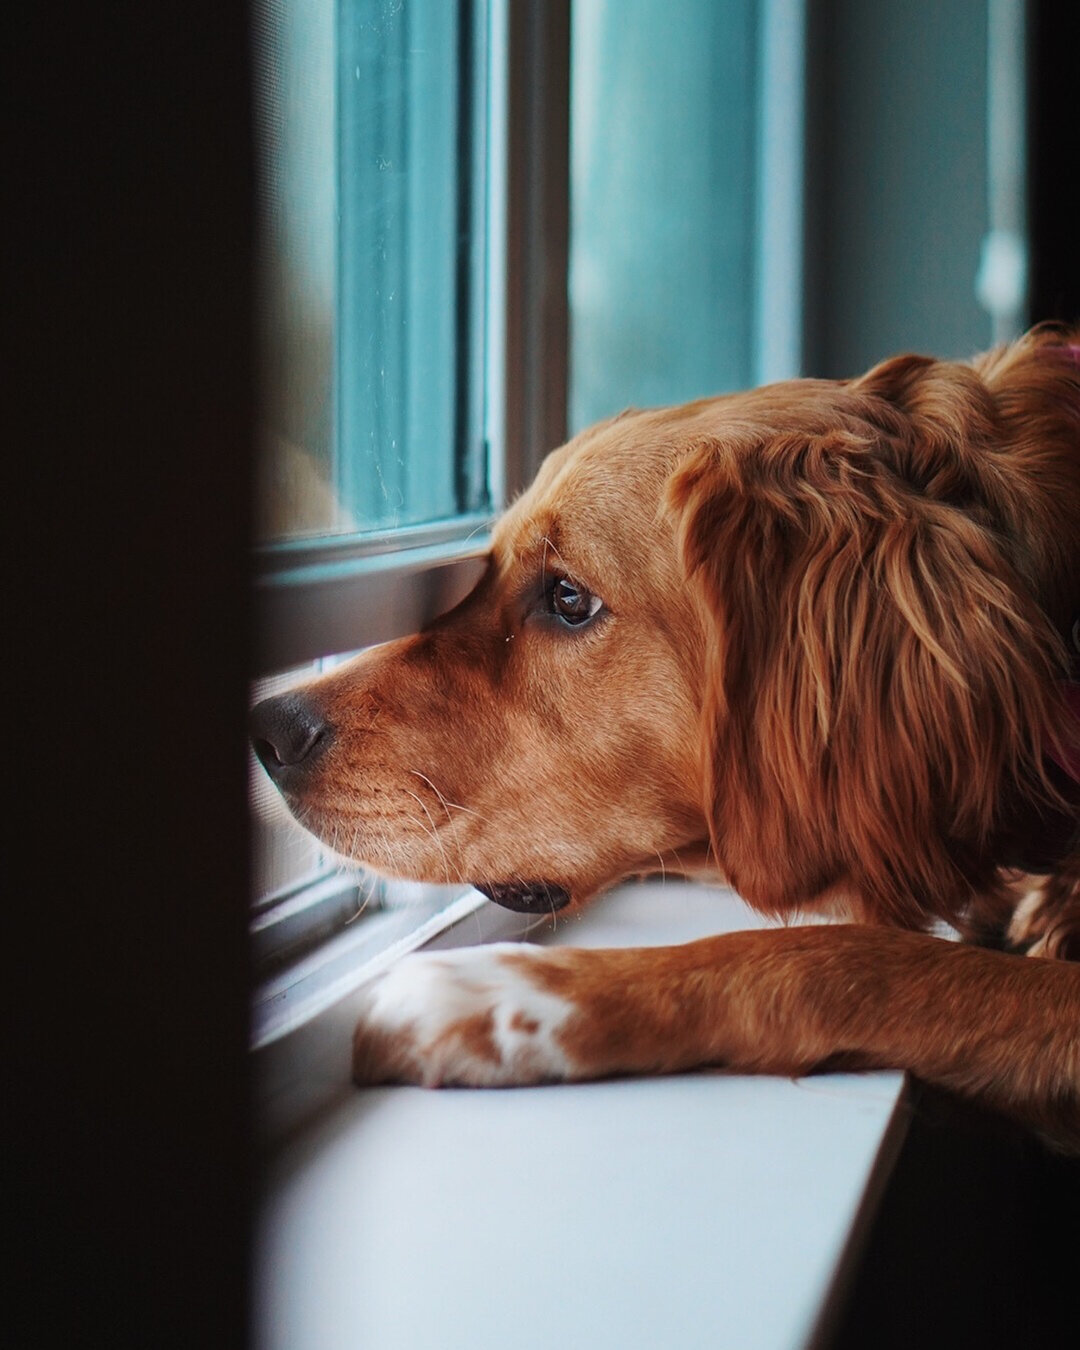 As much as we want to take our furry companions with us everywhere, there comes a time where your pup needs to be left alone. Some can get very anxious or scared which is heartbreaking for all of us, whether it's a new pup afraid to be alone, or a do